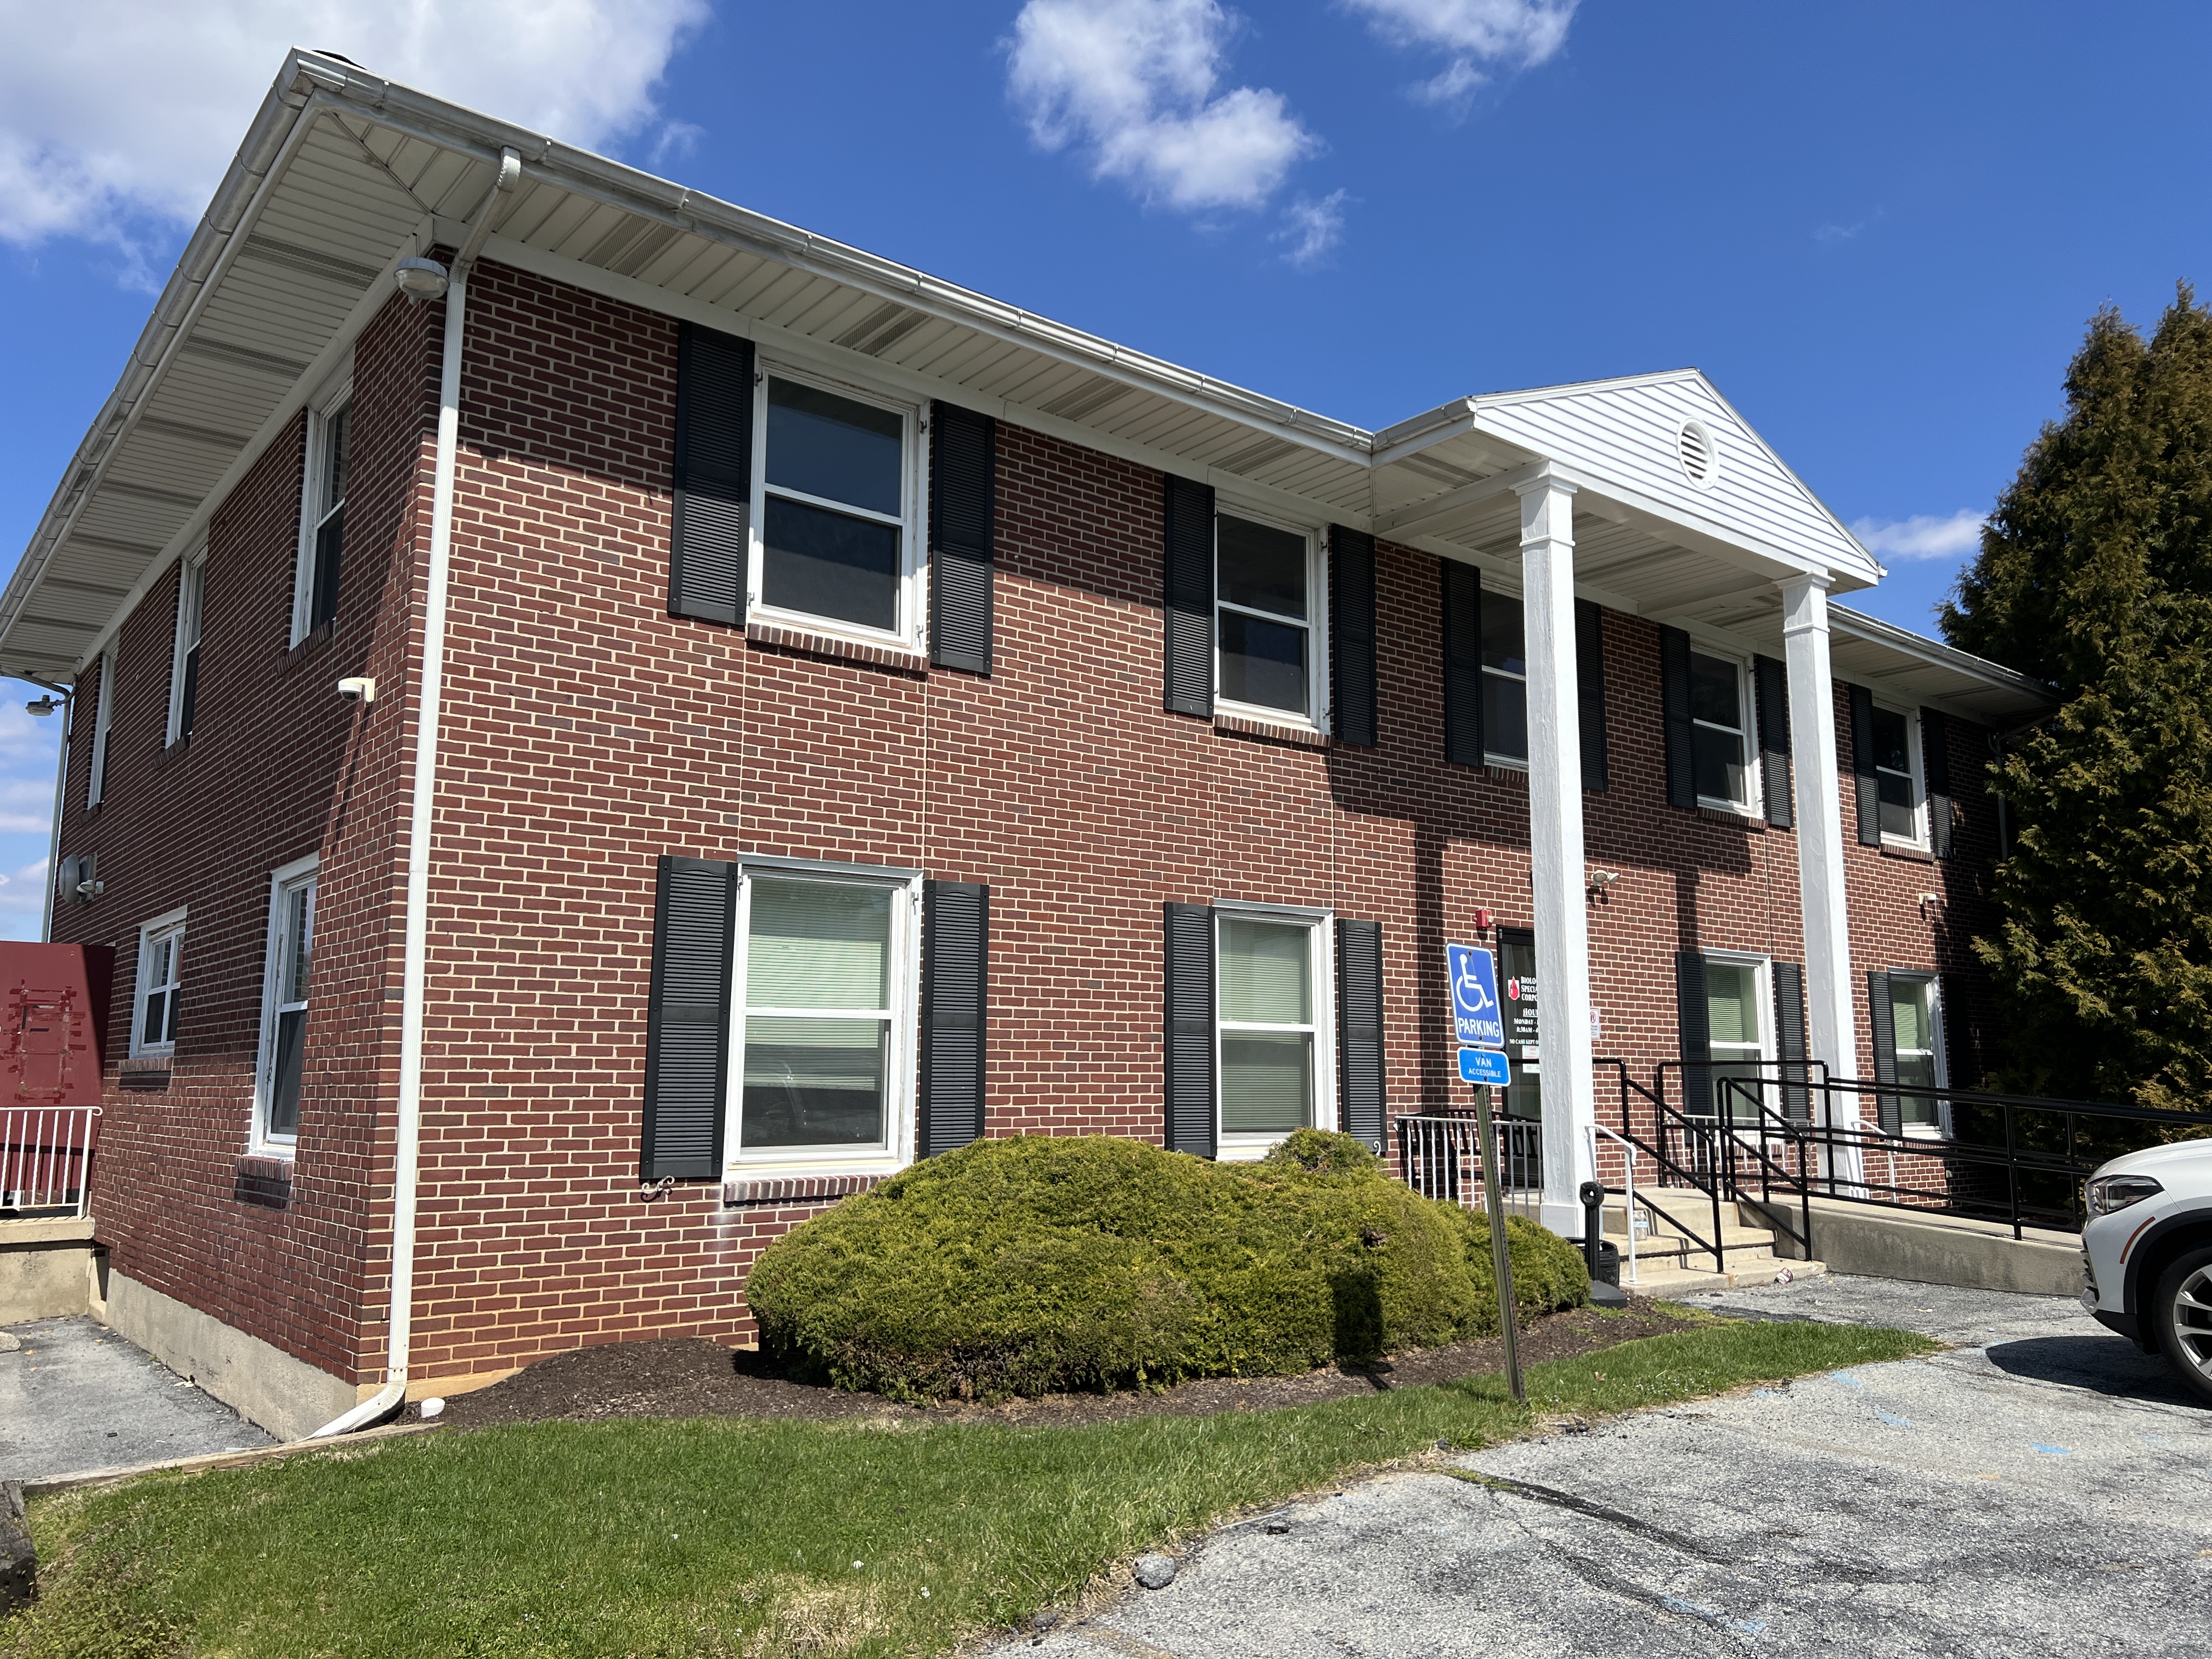 1401 W Green St, Allentown, Pennsylvania 18102, ,Office,For Sale and For Lease,1401 W Green St,1099